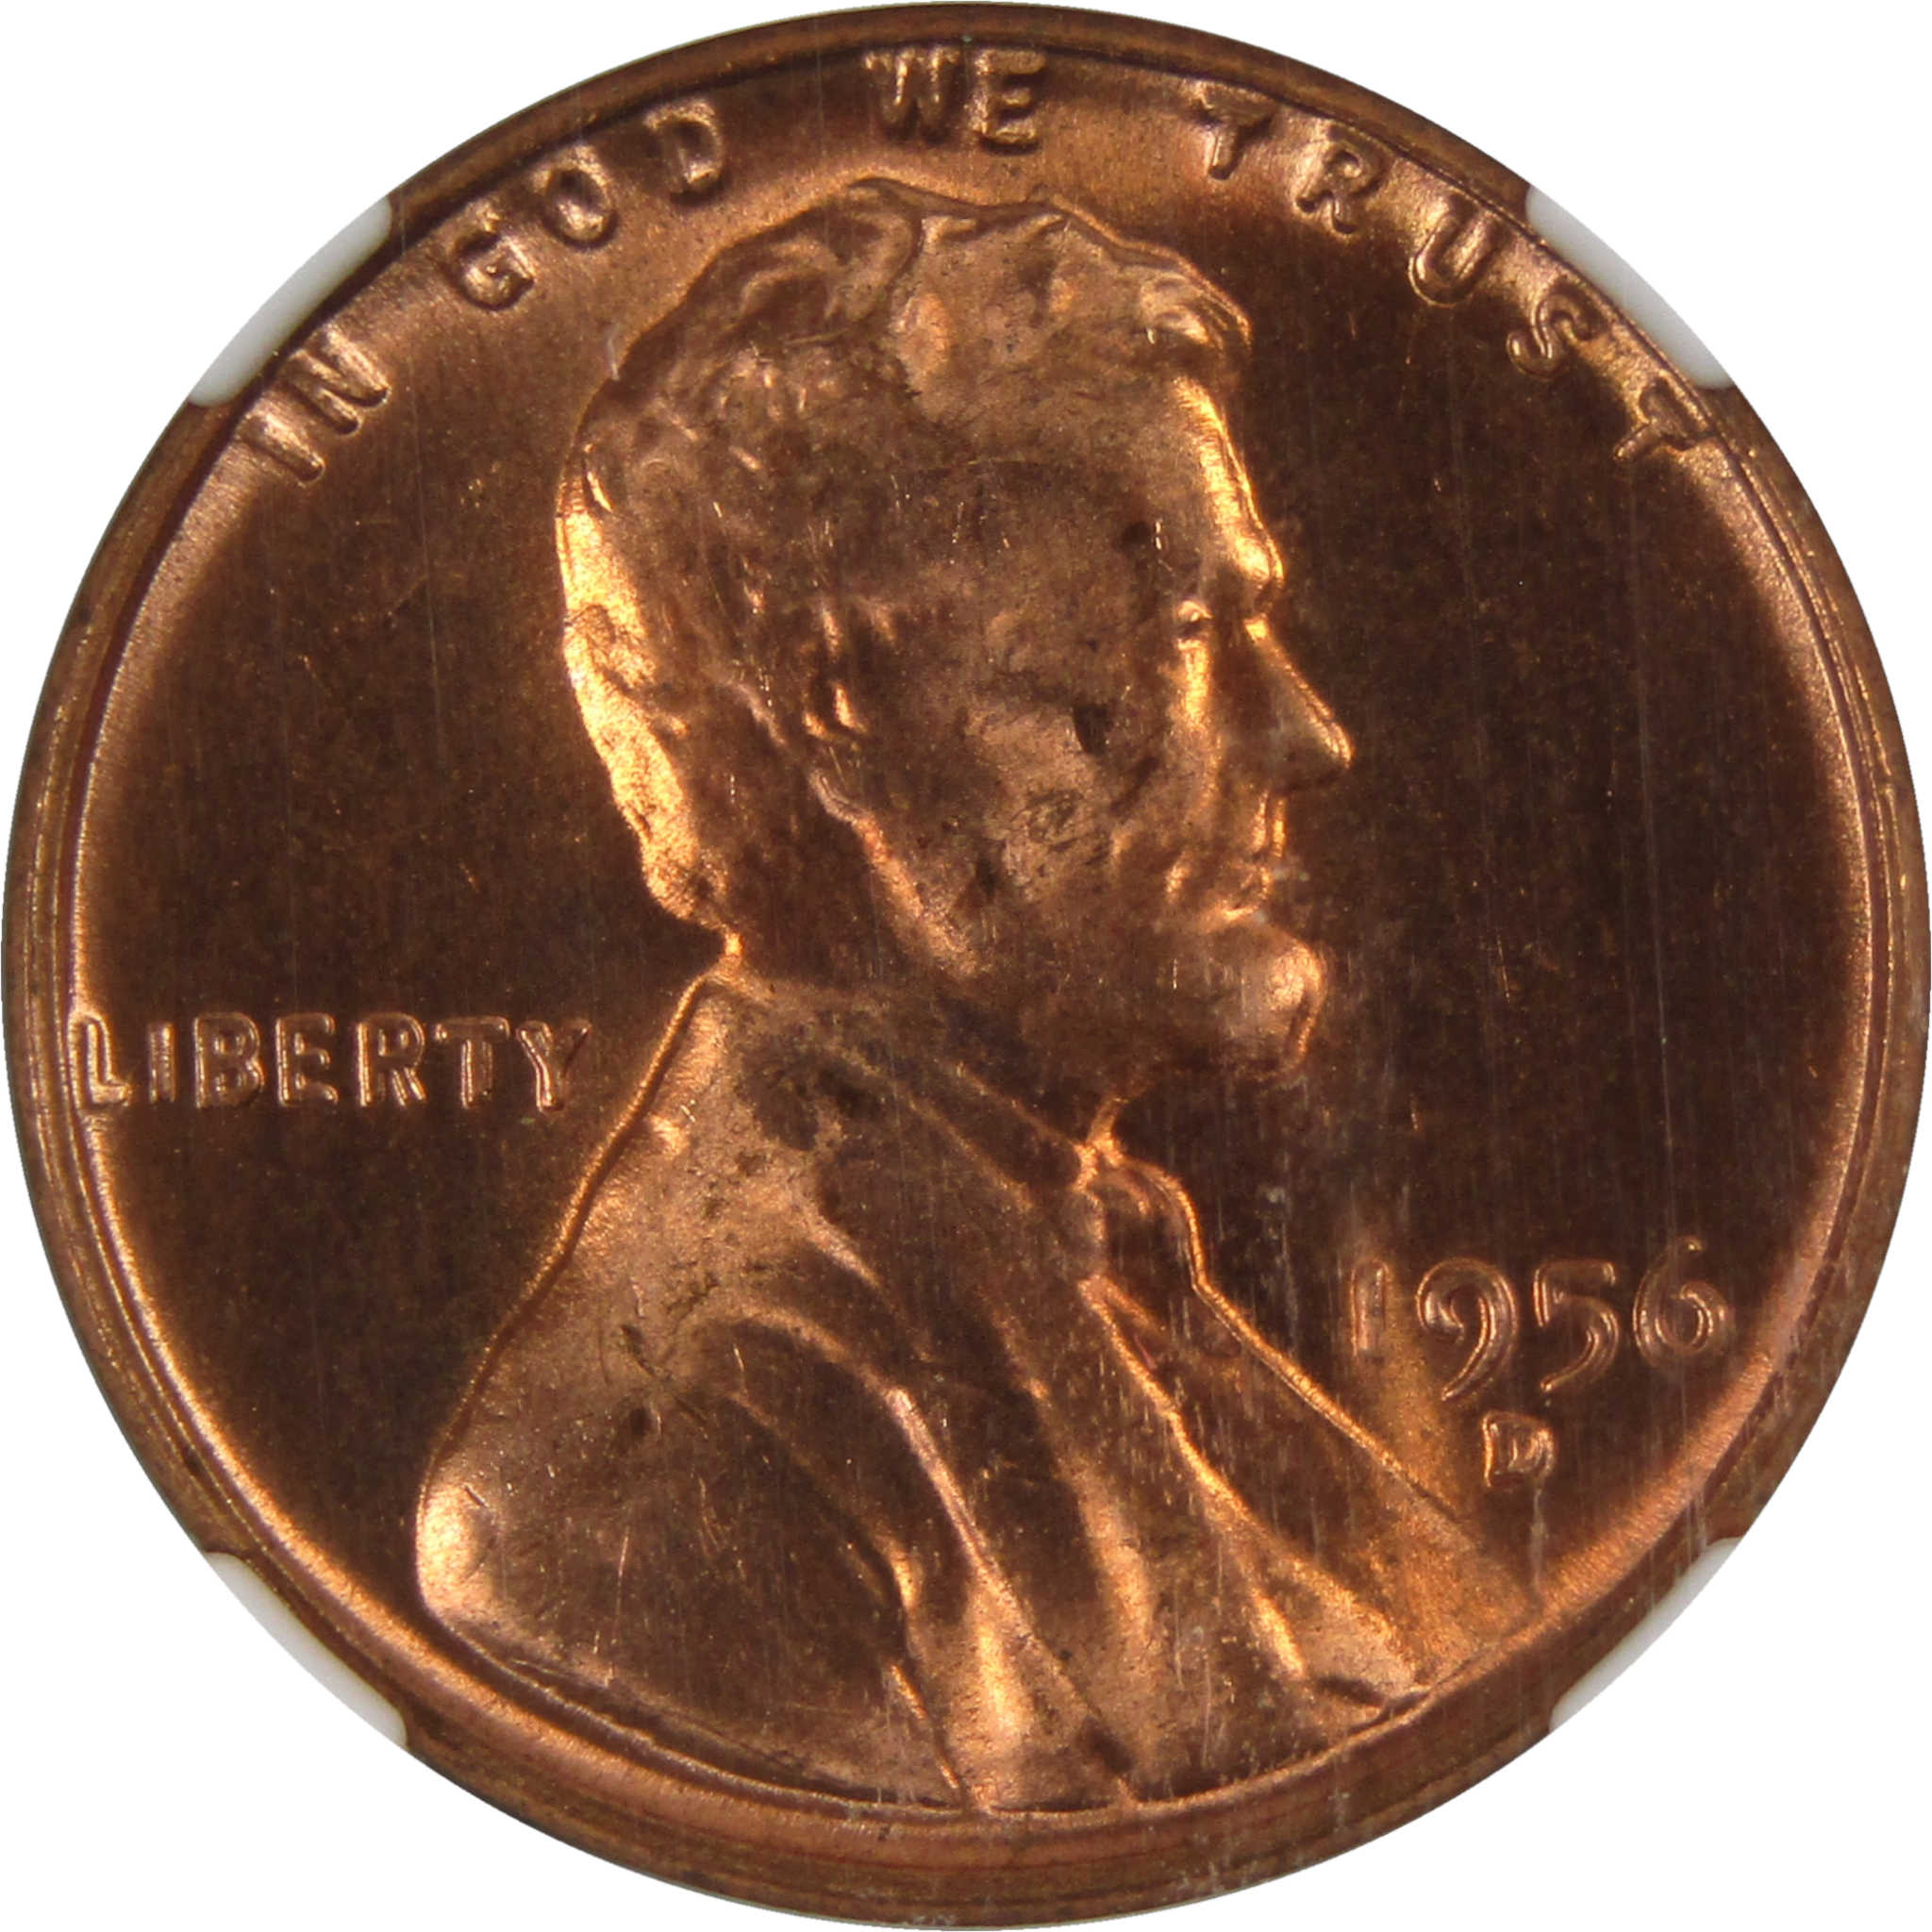 1956 D Lincoln Wheat Cent MS 66 RD NGC Penny Uncirculated SKU:I3648